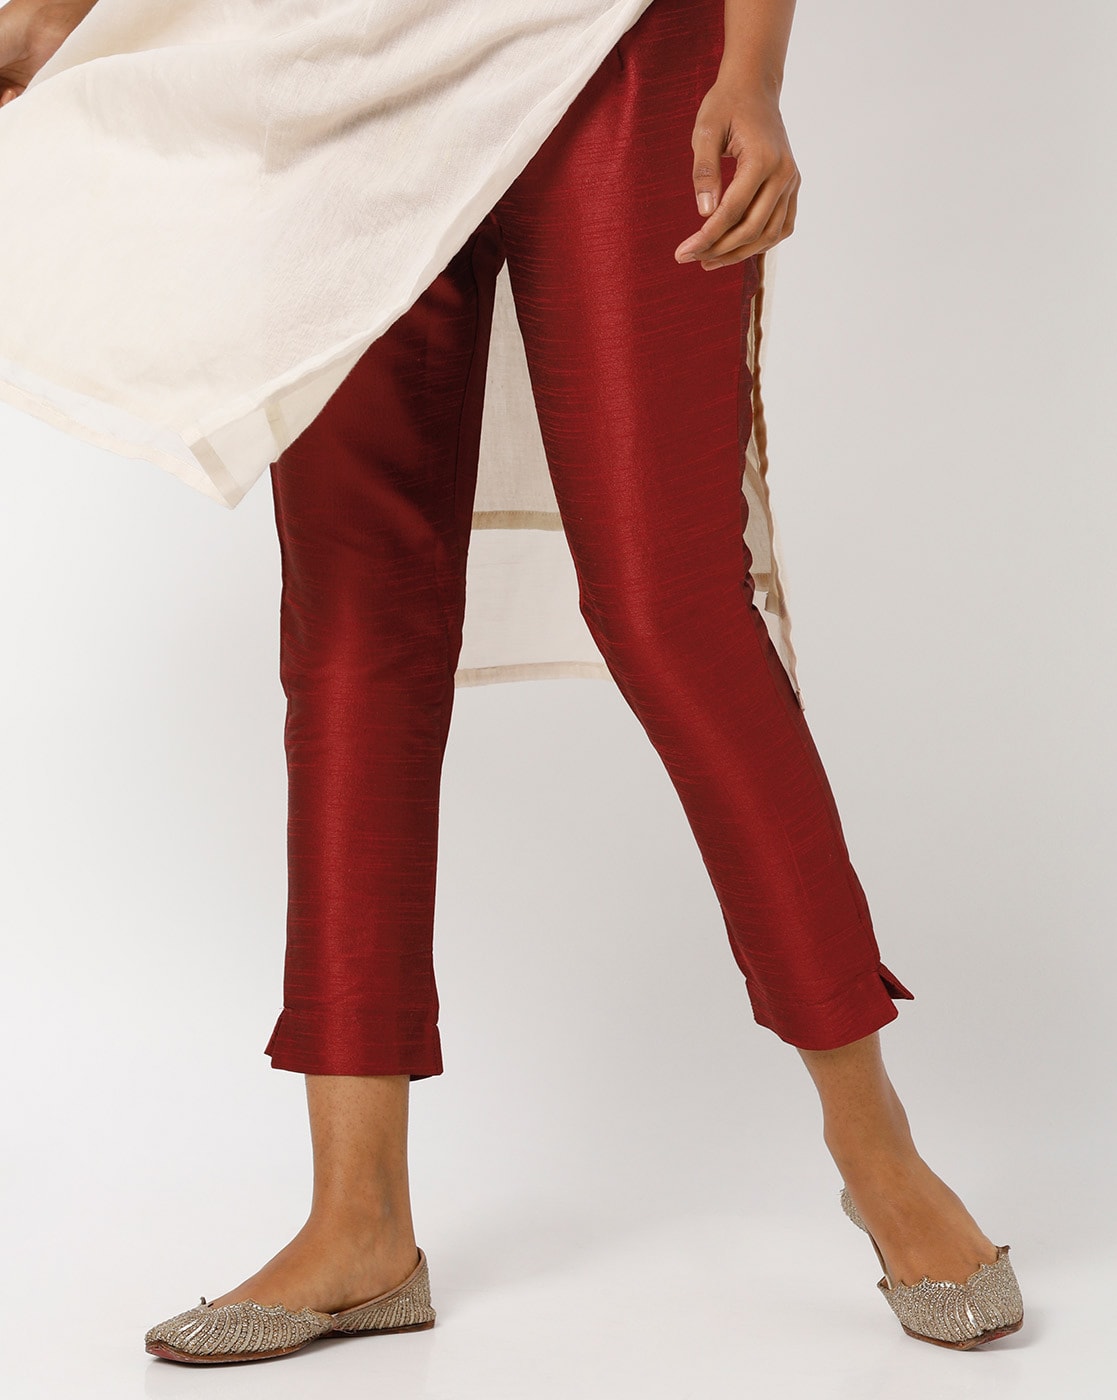 Buy SAJKE Cotton Flex Stretchable Slim Fit Red Straight Casual Cigarette  Pants Trouser for Girls/Ladies/Women(Red) at Amazon.in